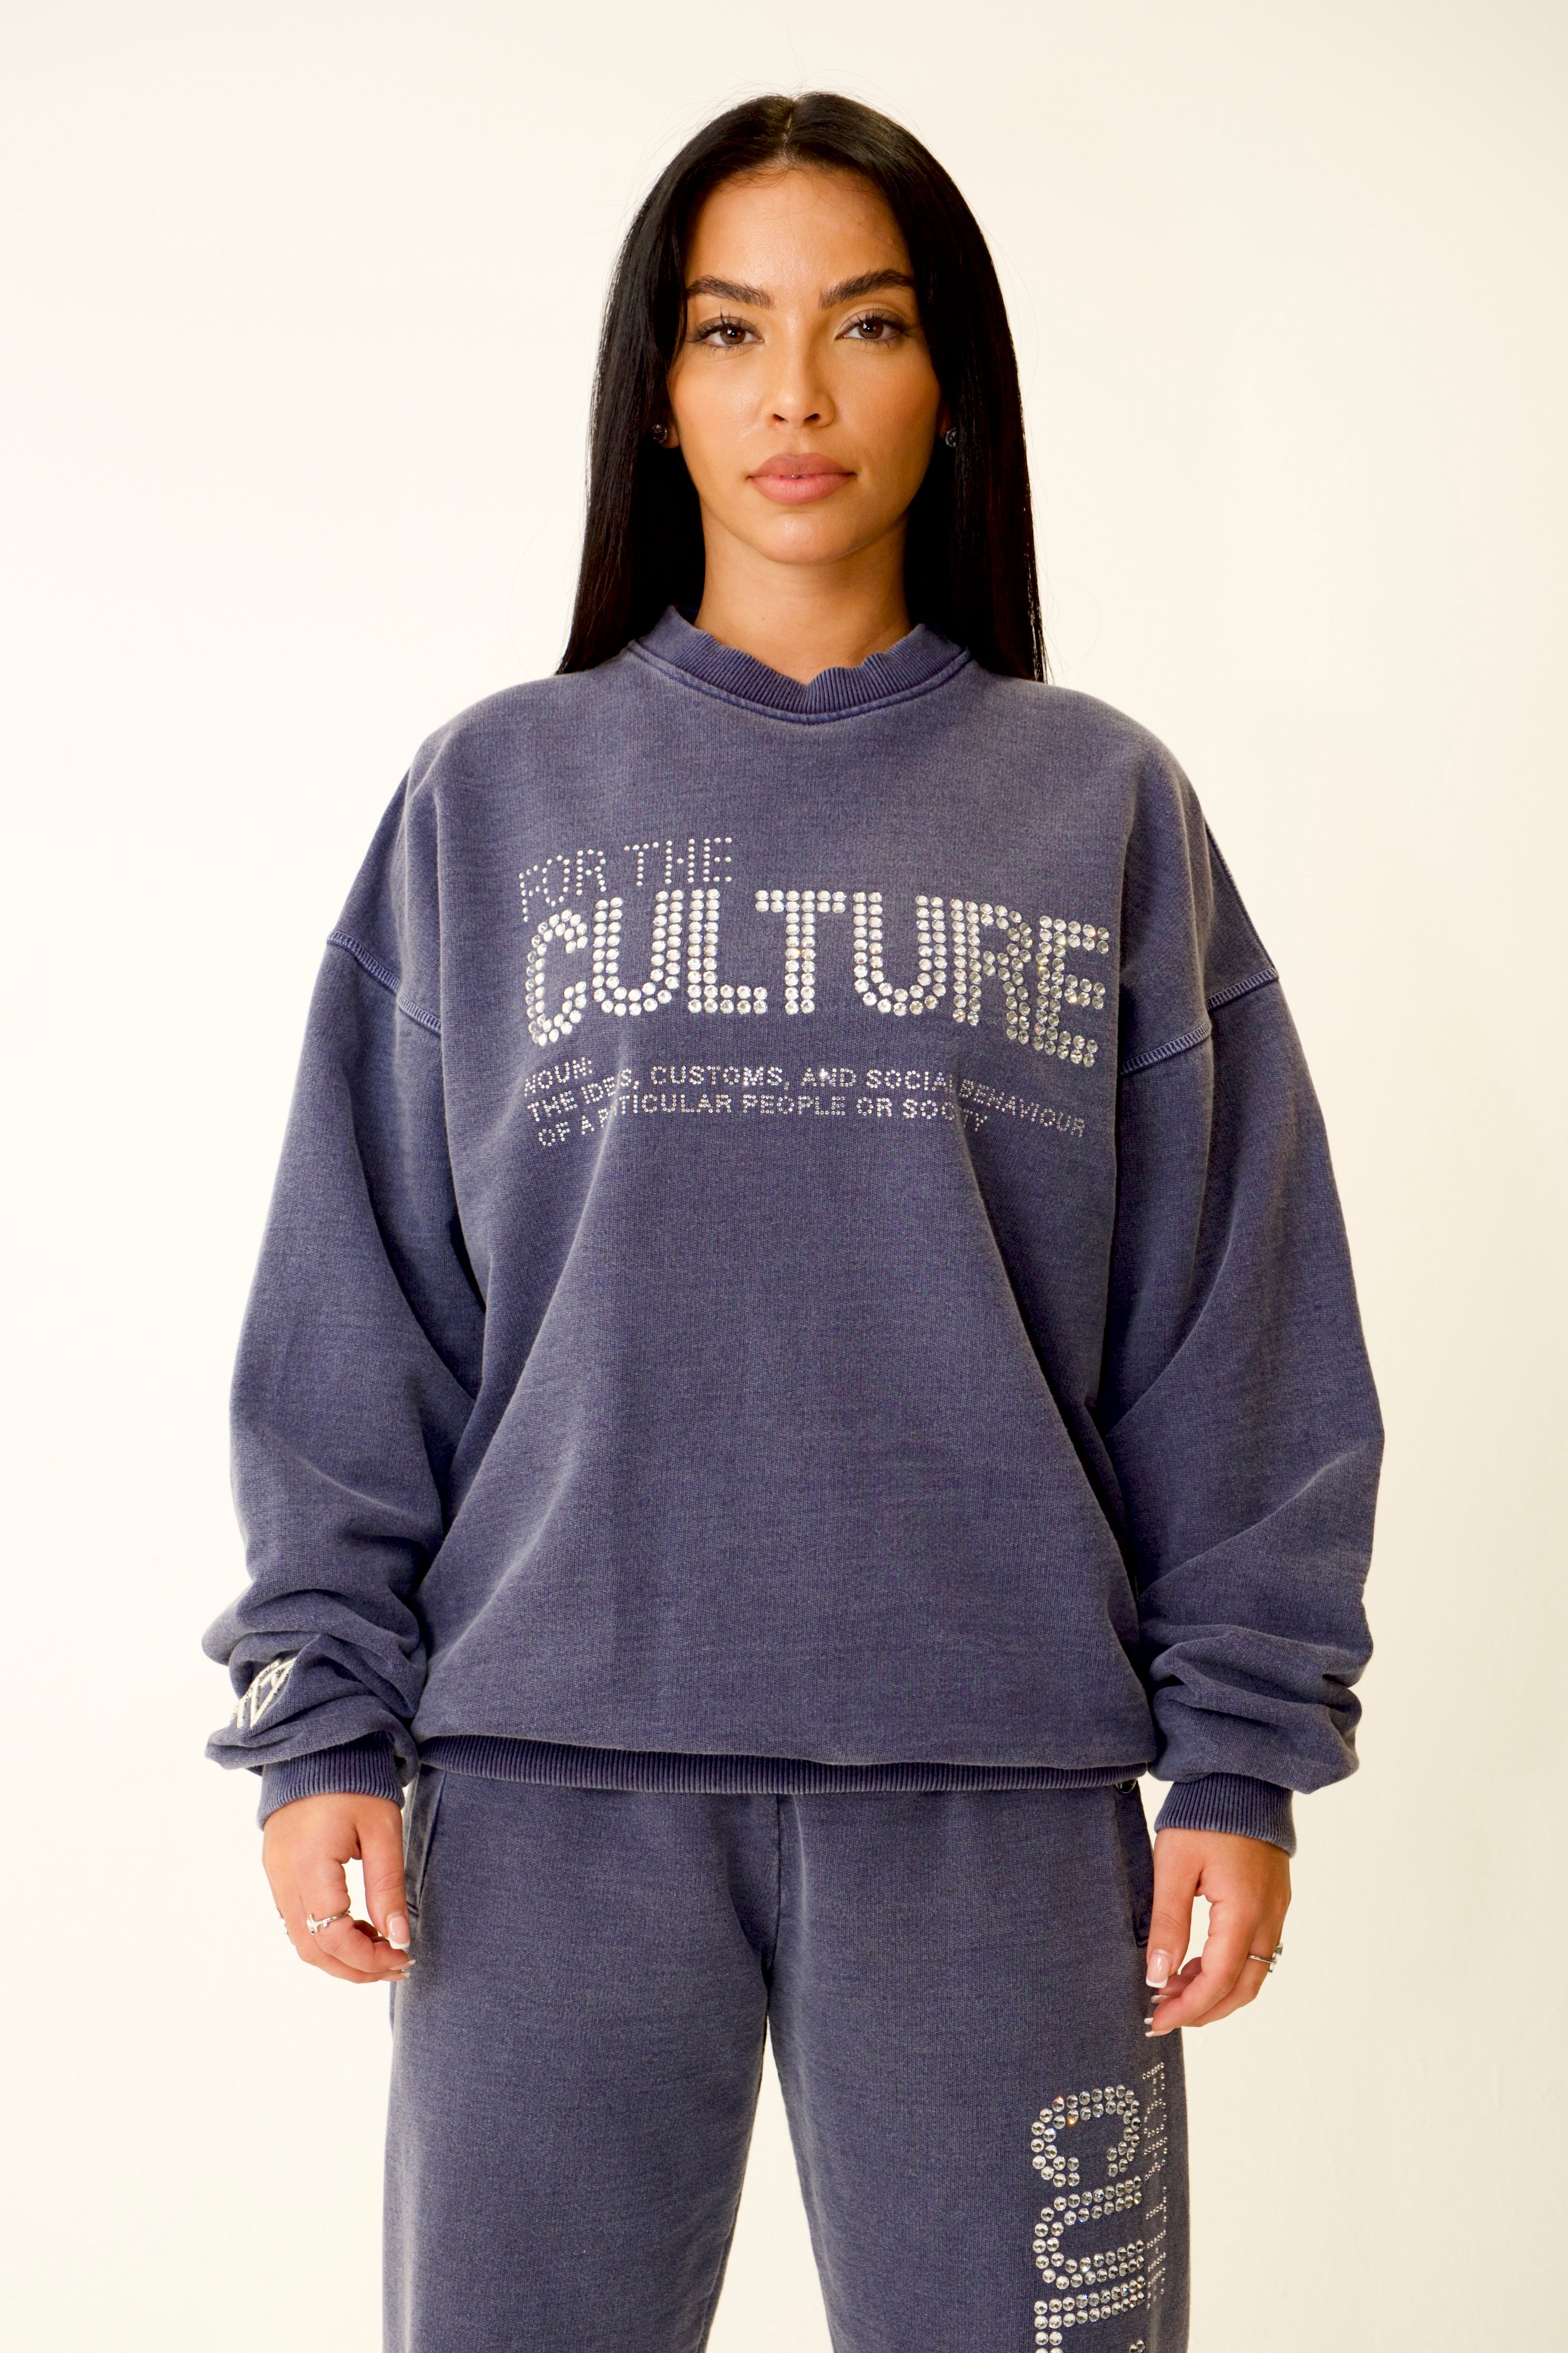 For The Culture Crystal Sweatshirt - Navy